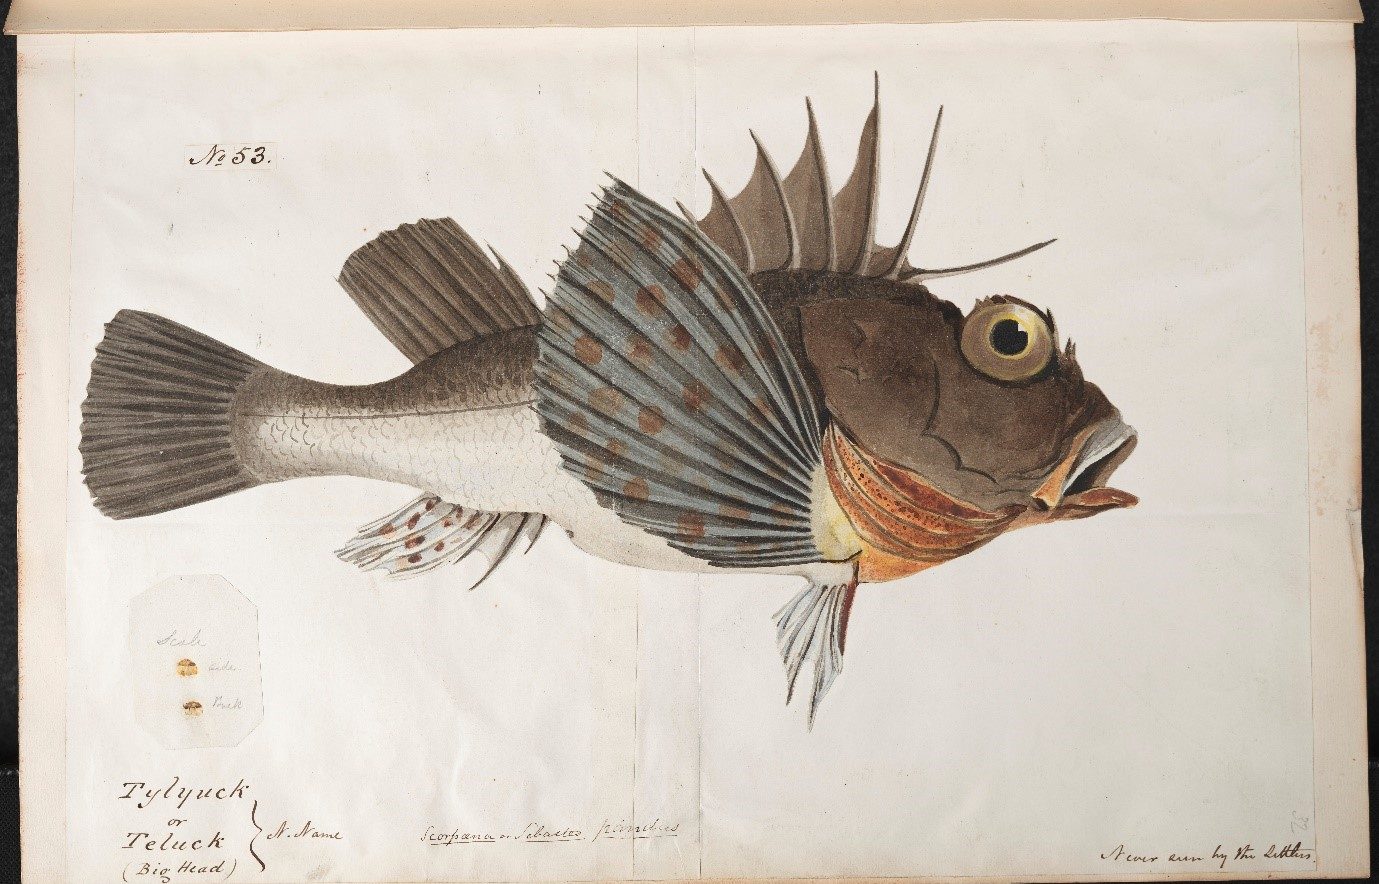 Colour illustration of the same fish from the engraving.